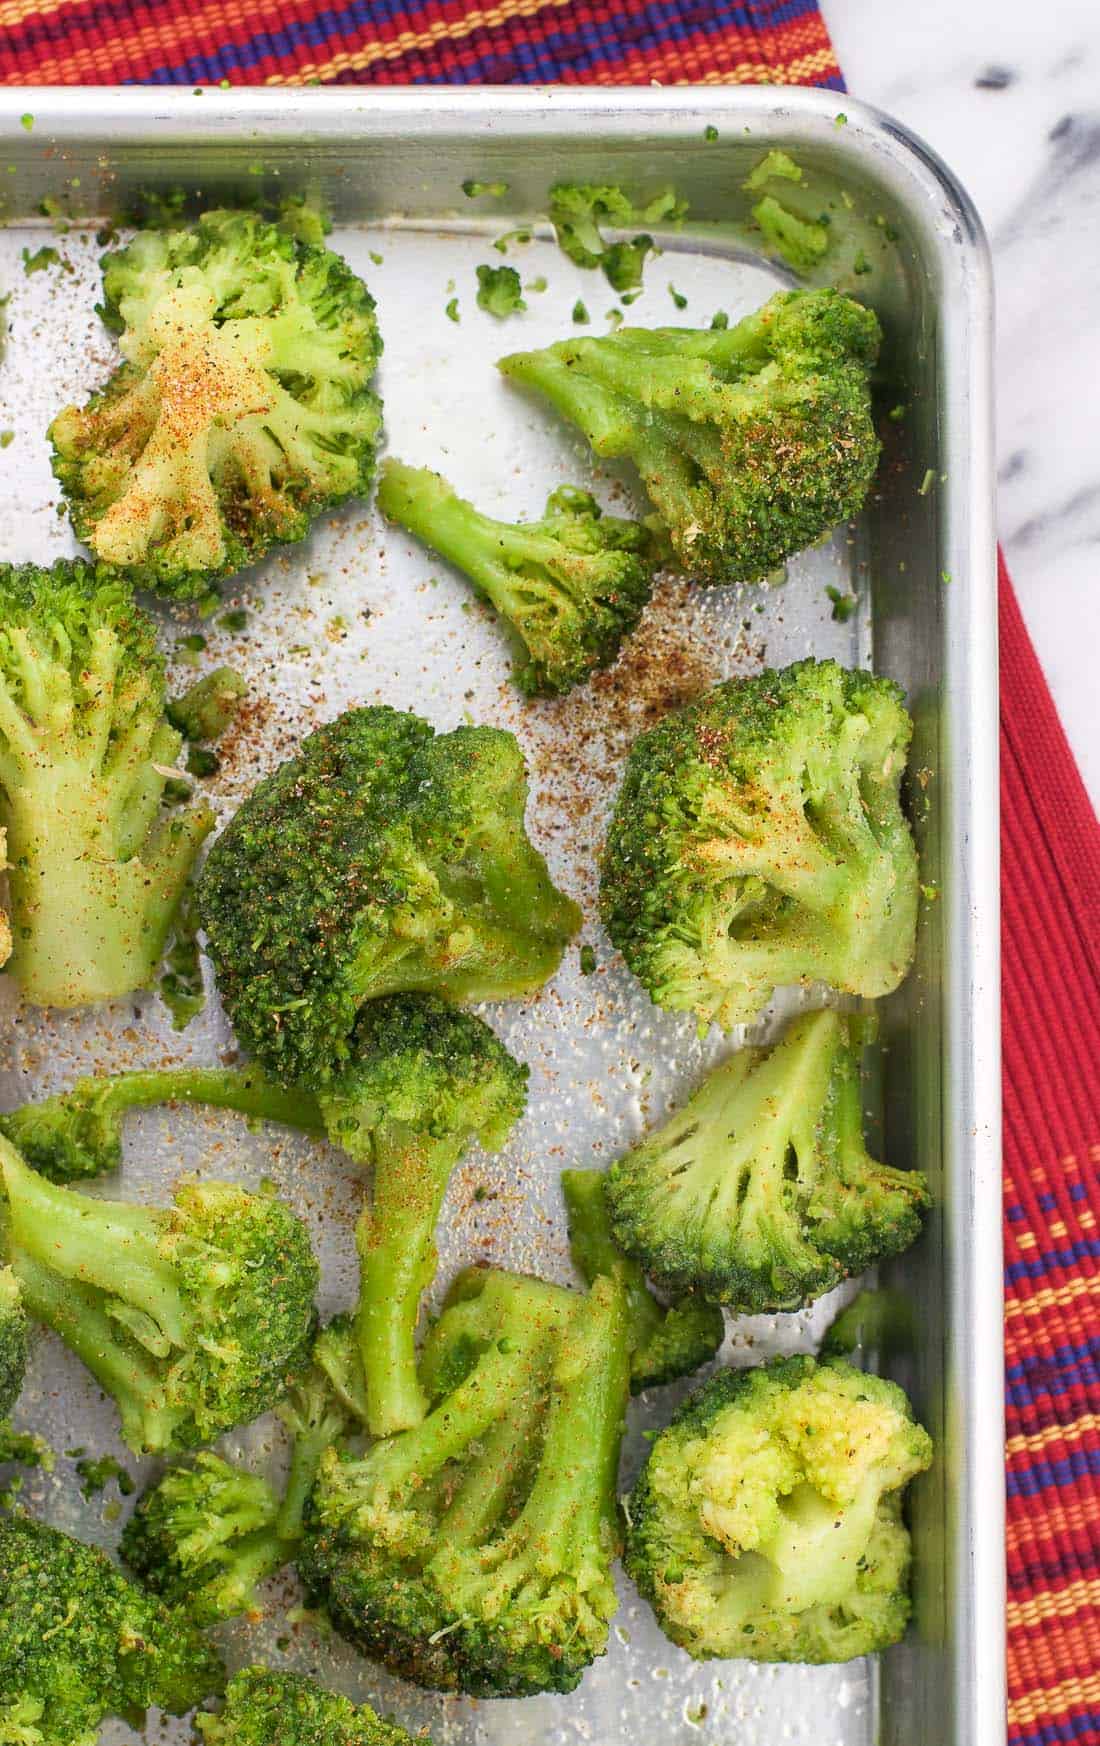 Broccoli florets on a rimmed baking sheet after being tossed in olive oil and seasoned before roasting